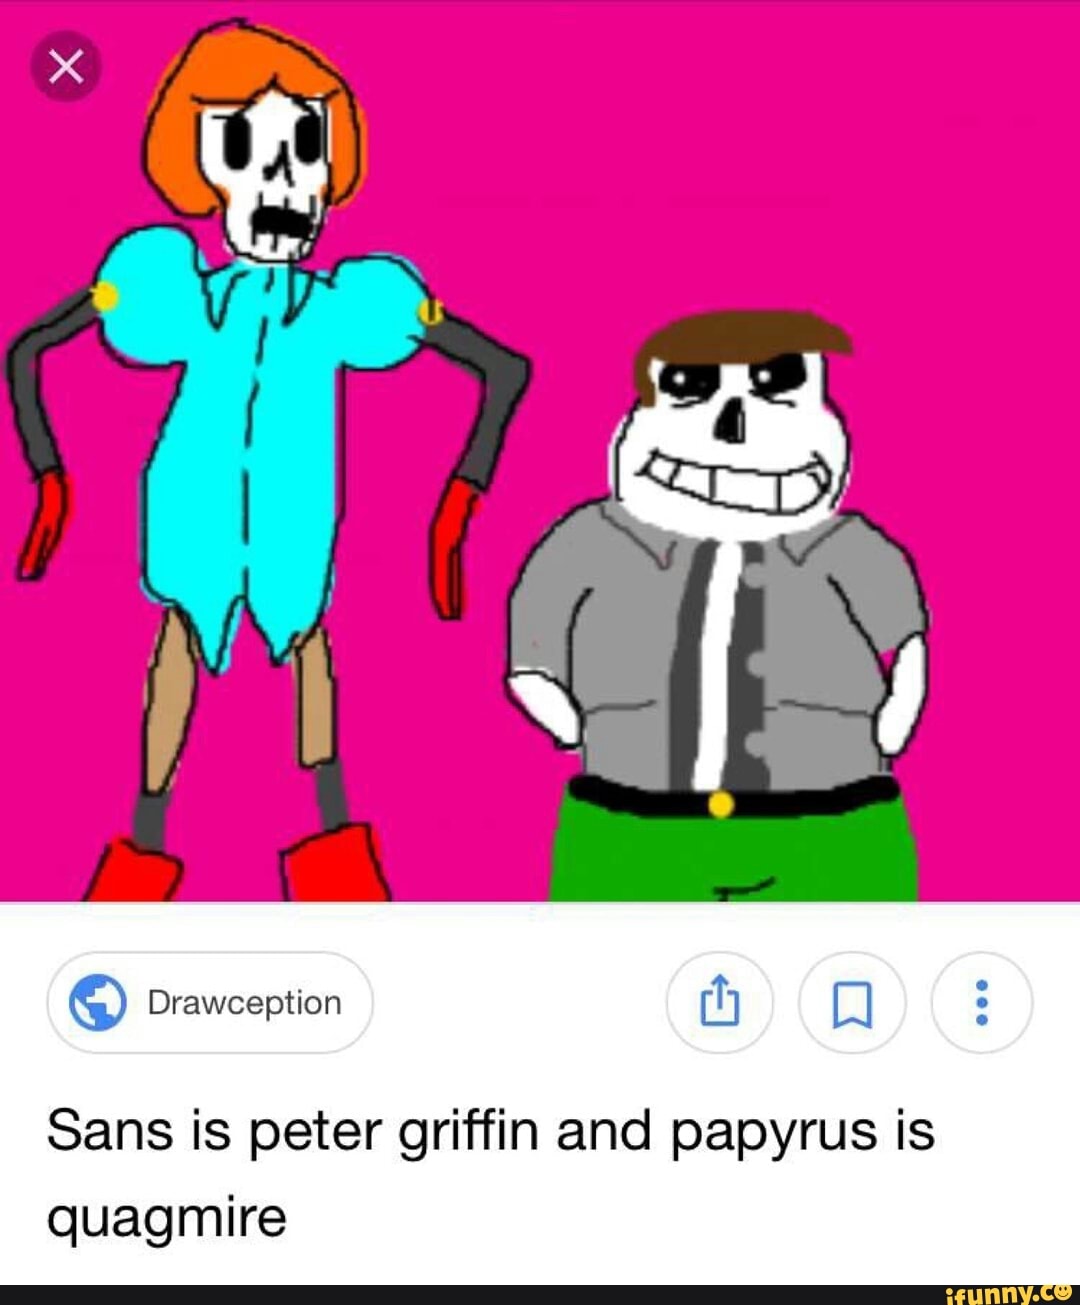 Sans is peter griffin and papyrus is quagmire.